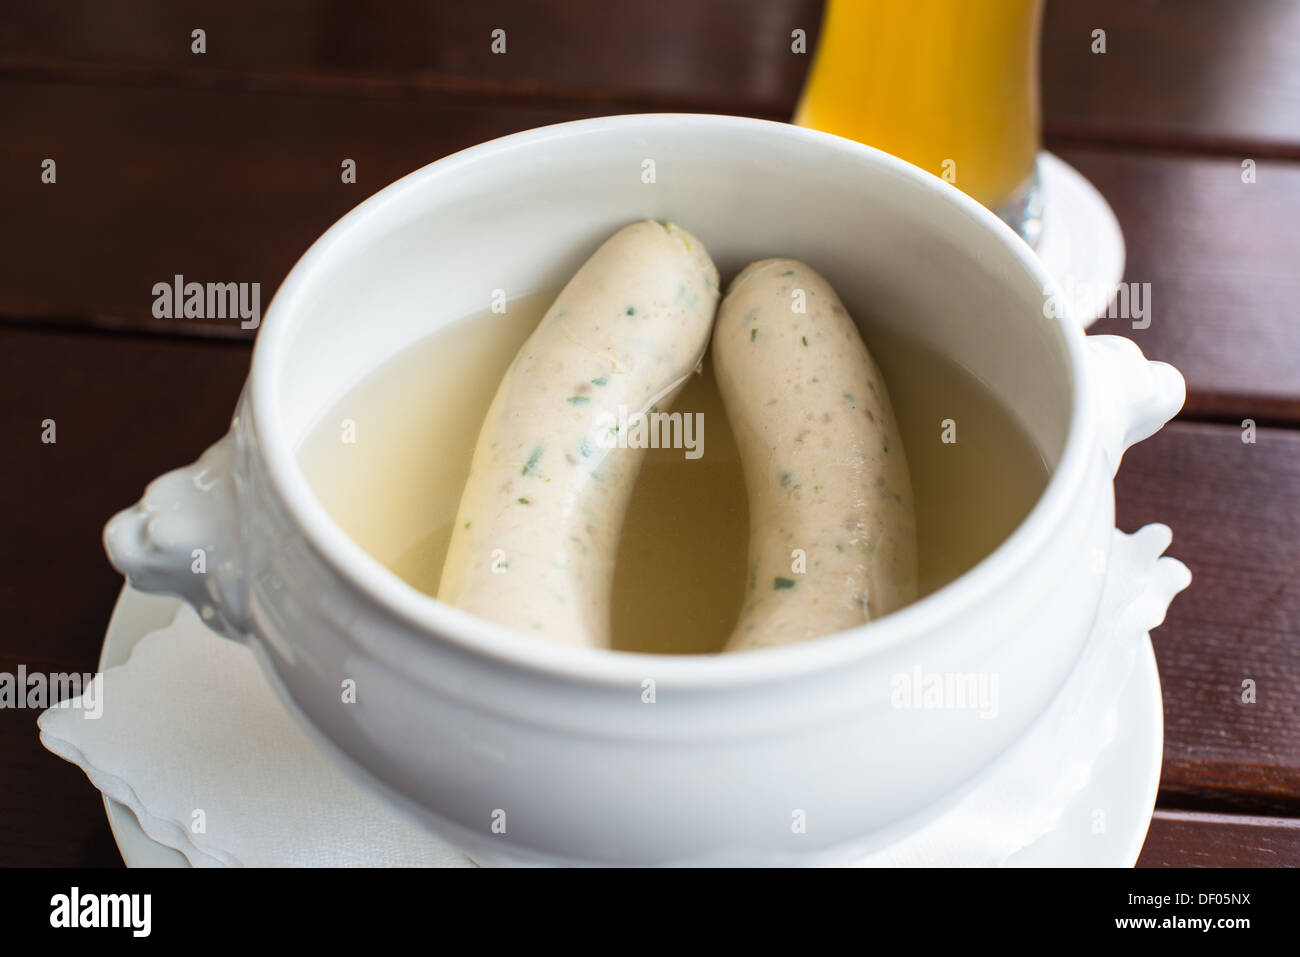 Weisswurst - typical Bavarian white sausages with Hefeweizen (wheat beer) Stock Photo